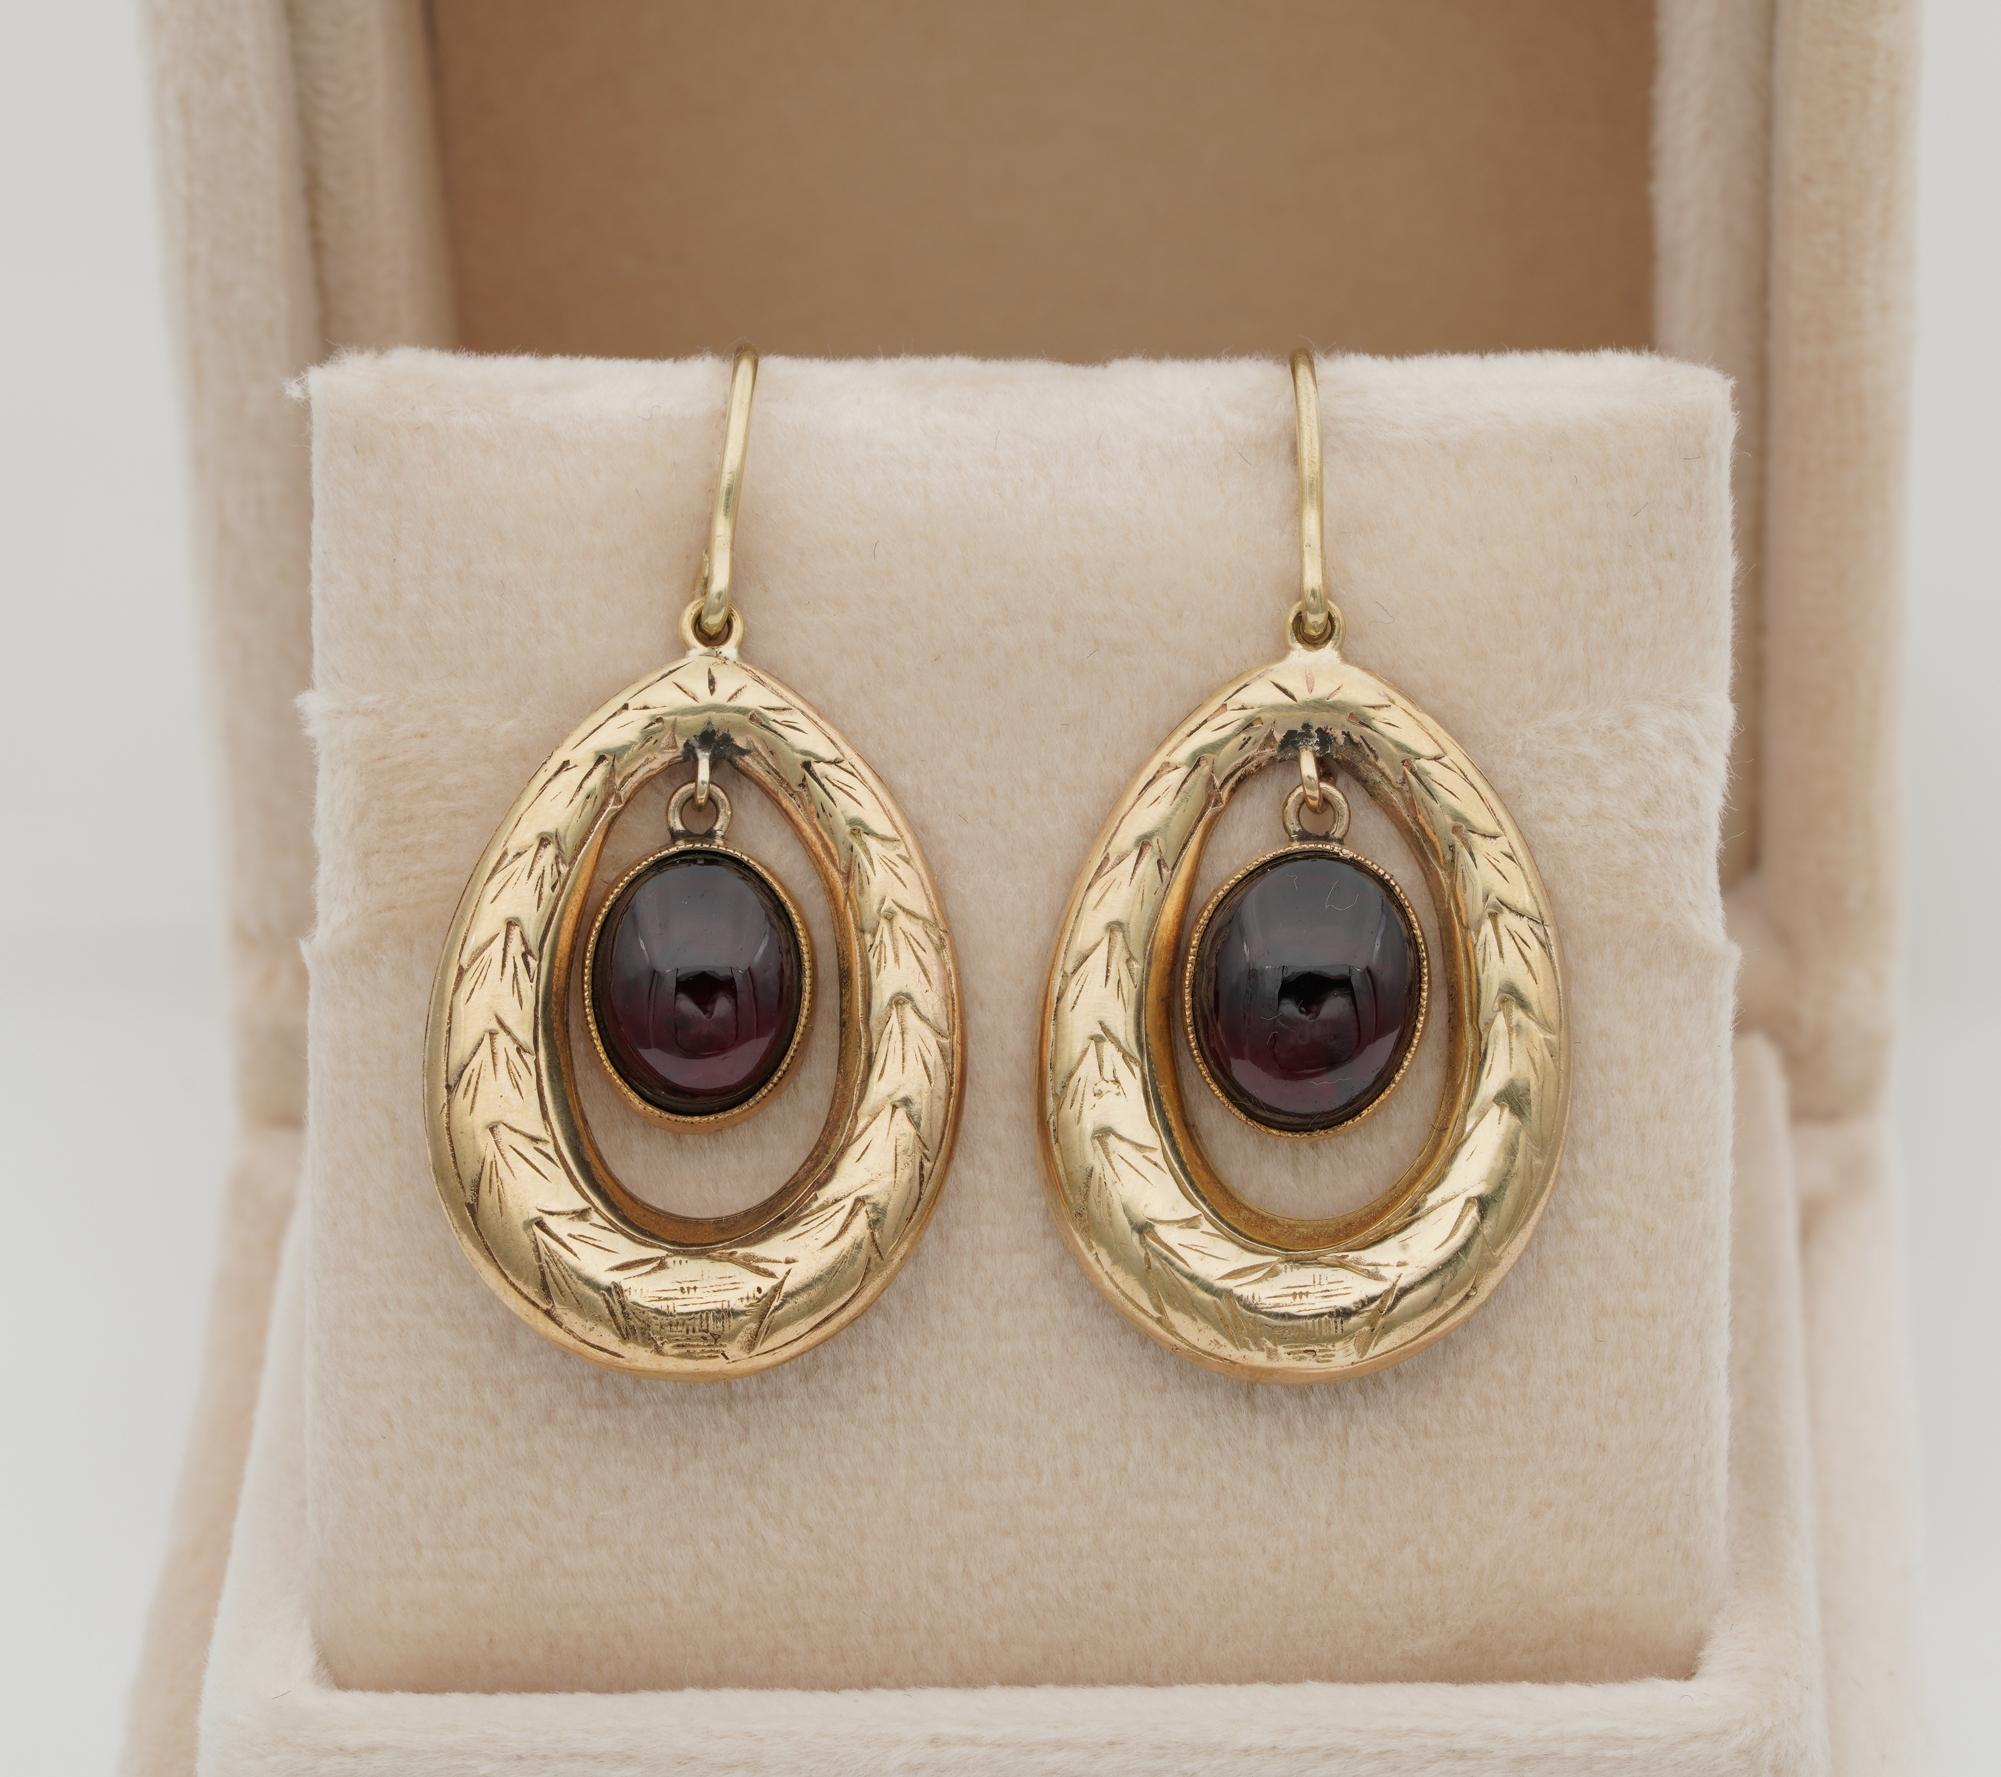 Ageless Victorian Allure

Beautiful pair of Victorian period Garnet Drop earrings
Timeless in beauty designed in a carved Wreath of gold framing the swinging drop of Garnet attracting the attention with the fabulous Bohemian Red glowing in the